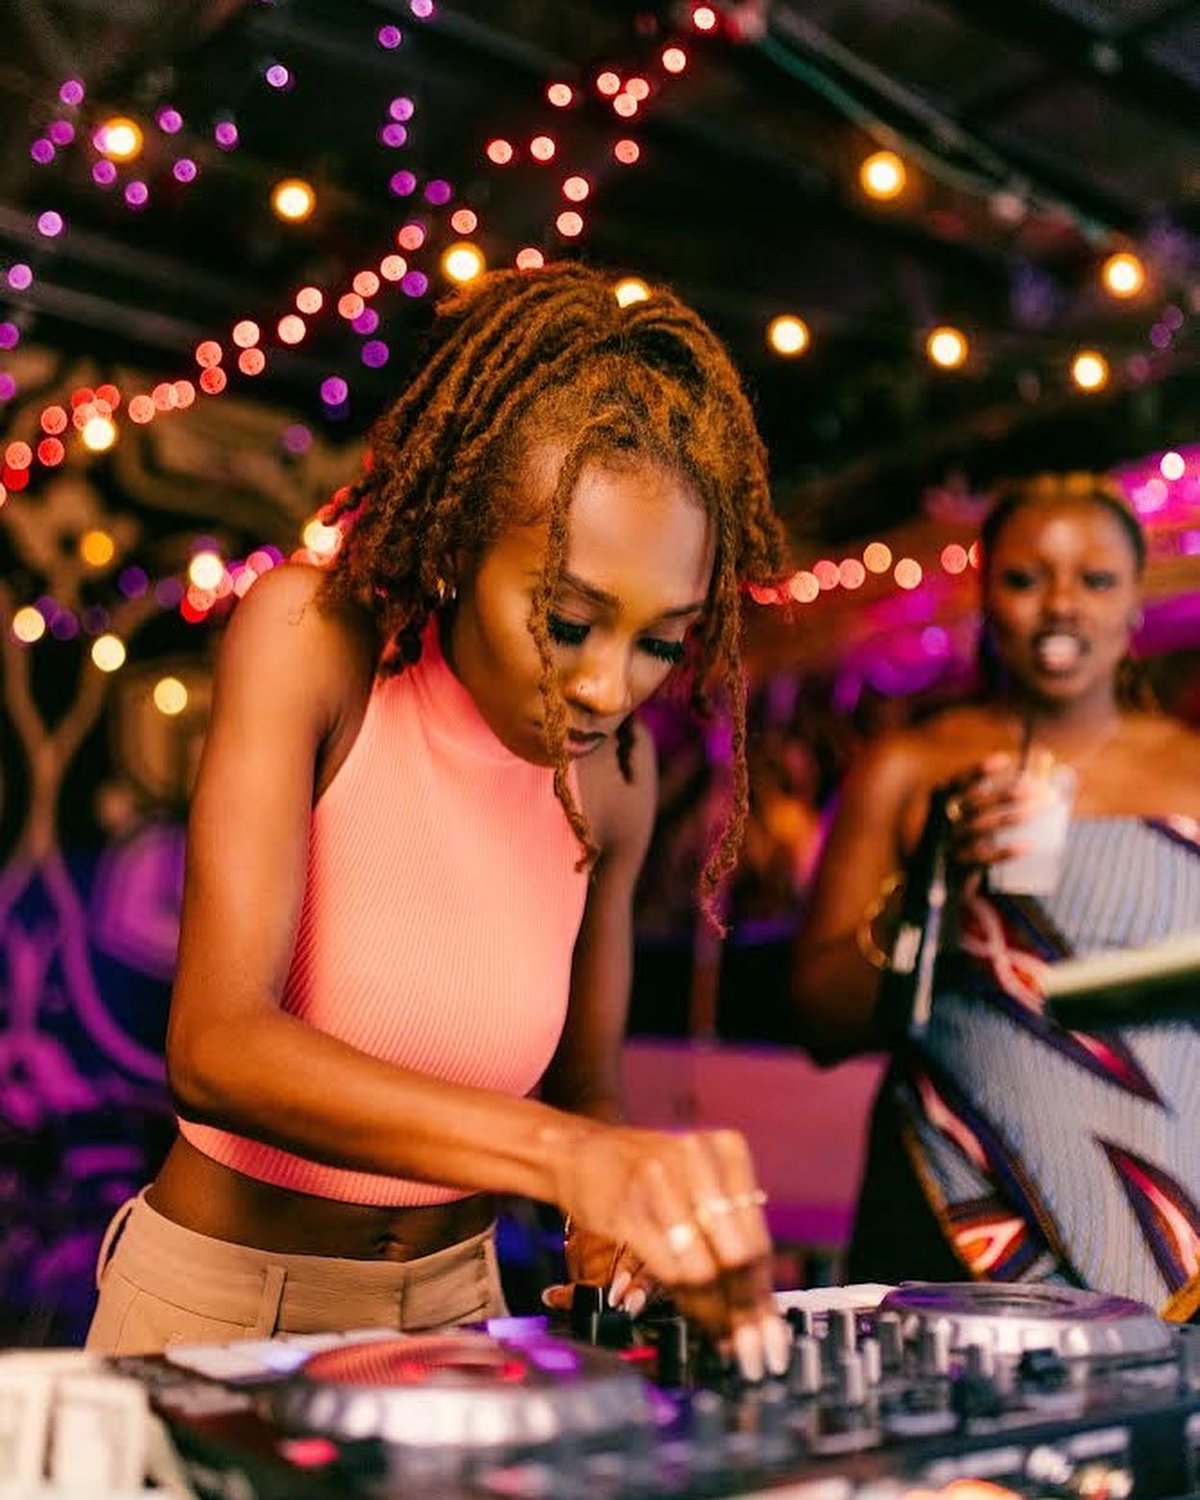 DJ Kaely Kellz (left) and musician (and host) MikeyyAustin are just two of the attractions set for A Night at the Soul Lounge, happening Saturday at The Avenue Café.